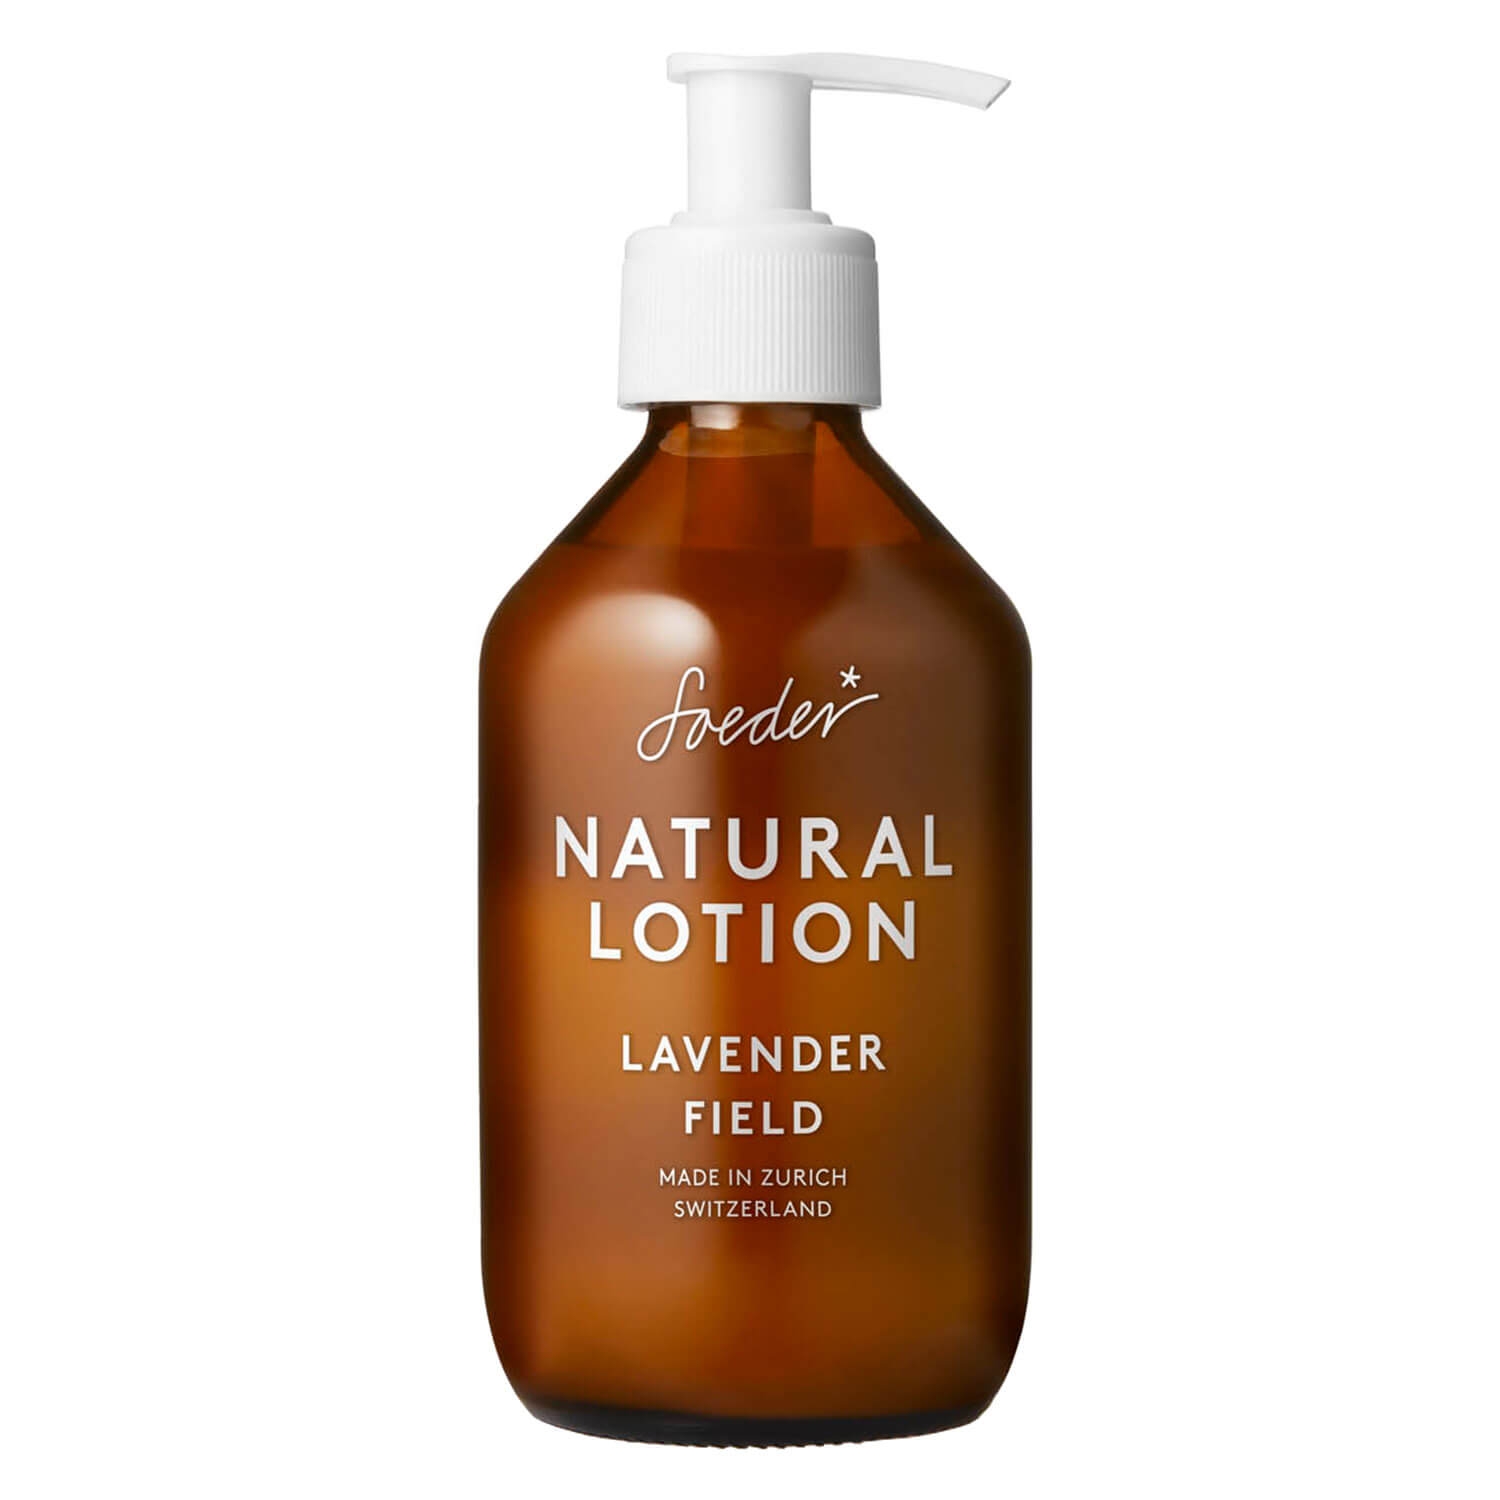 Product image from Soeder - Natural Lotion Lavender Field